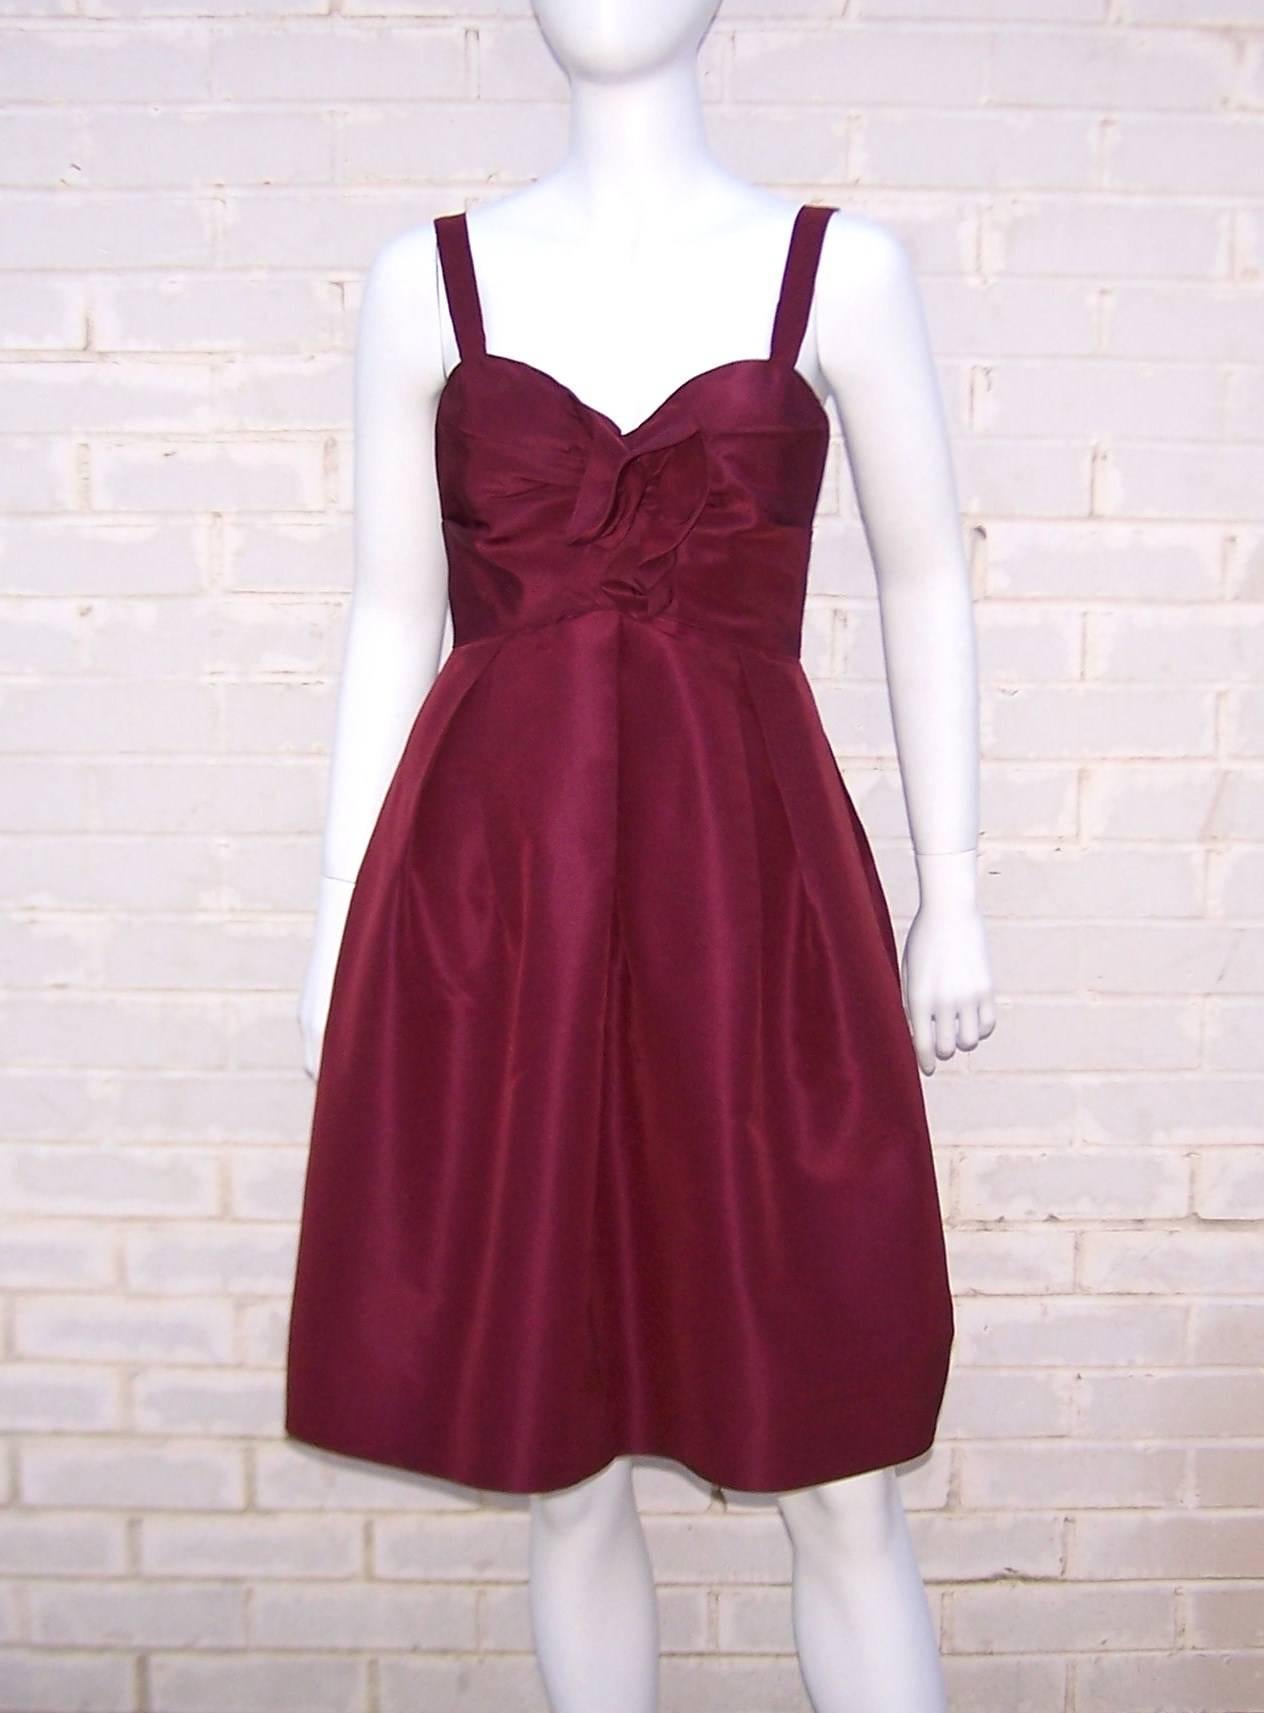 Oh the luxury and opulence of an Oscar de la Renta dress!  This beautifully designed gown has an elegant old school look with a good dose of modern sculptural construction.  Starting with rich aubergine silk taffeta, Mr. de la Renta formulates a